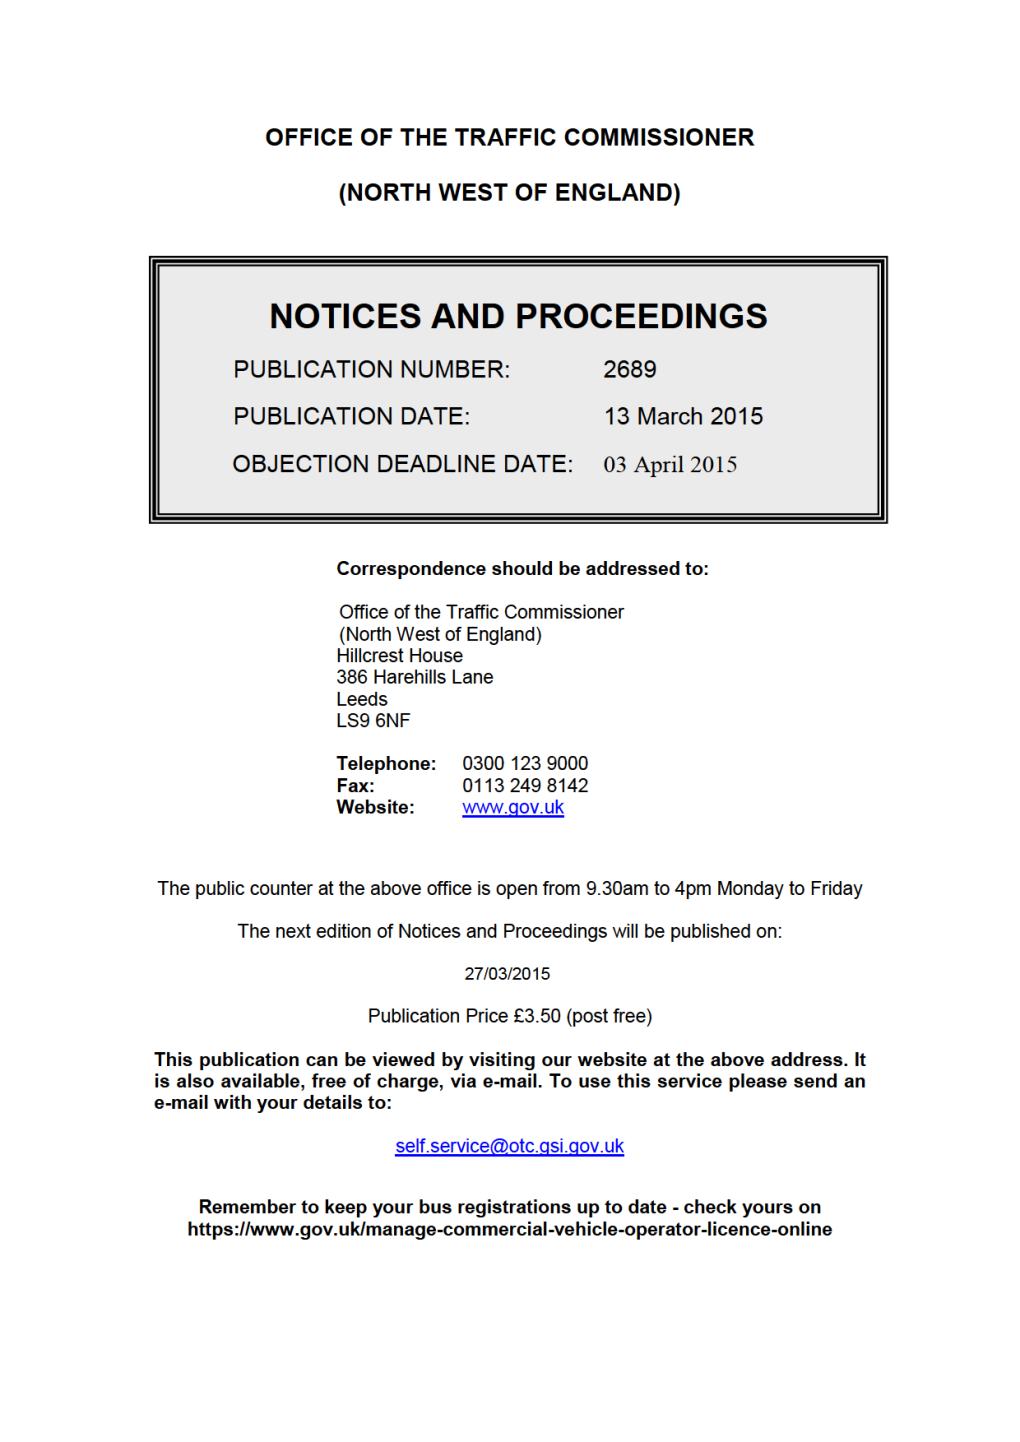 NOTICES and PROCEEDINGS 13 March 2015